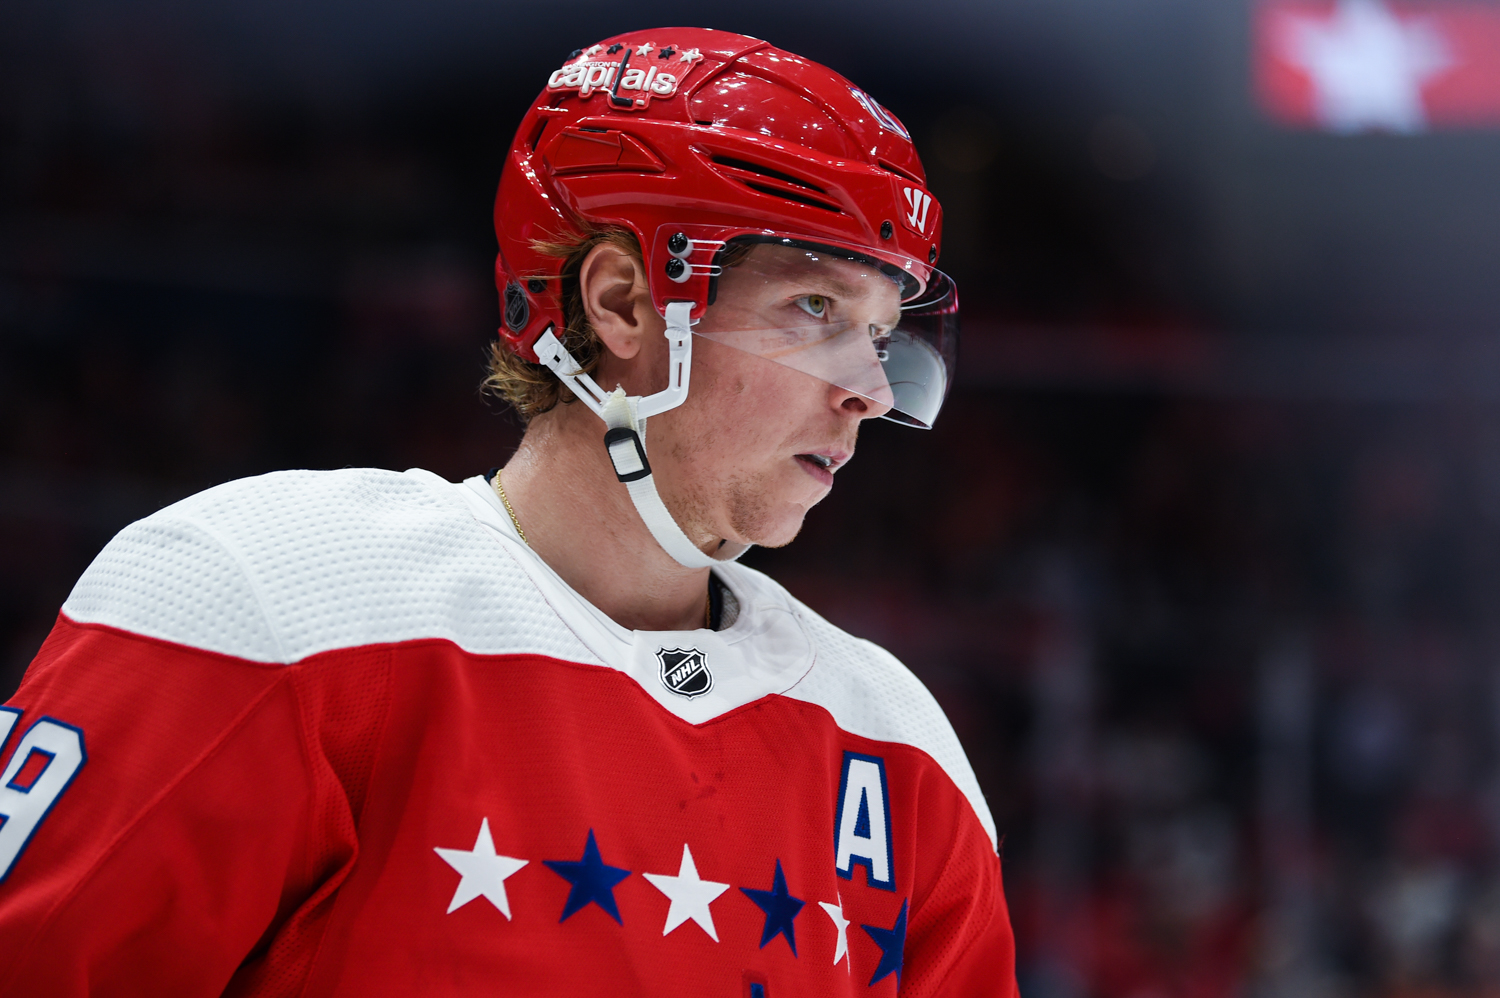 Washington Capitals center Nicklas Backstrom is listed as week-to-week due to rehabilitation on his hip.